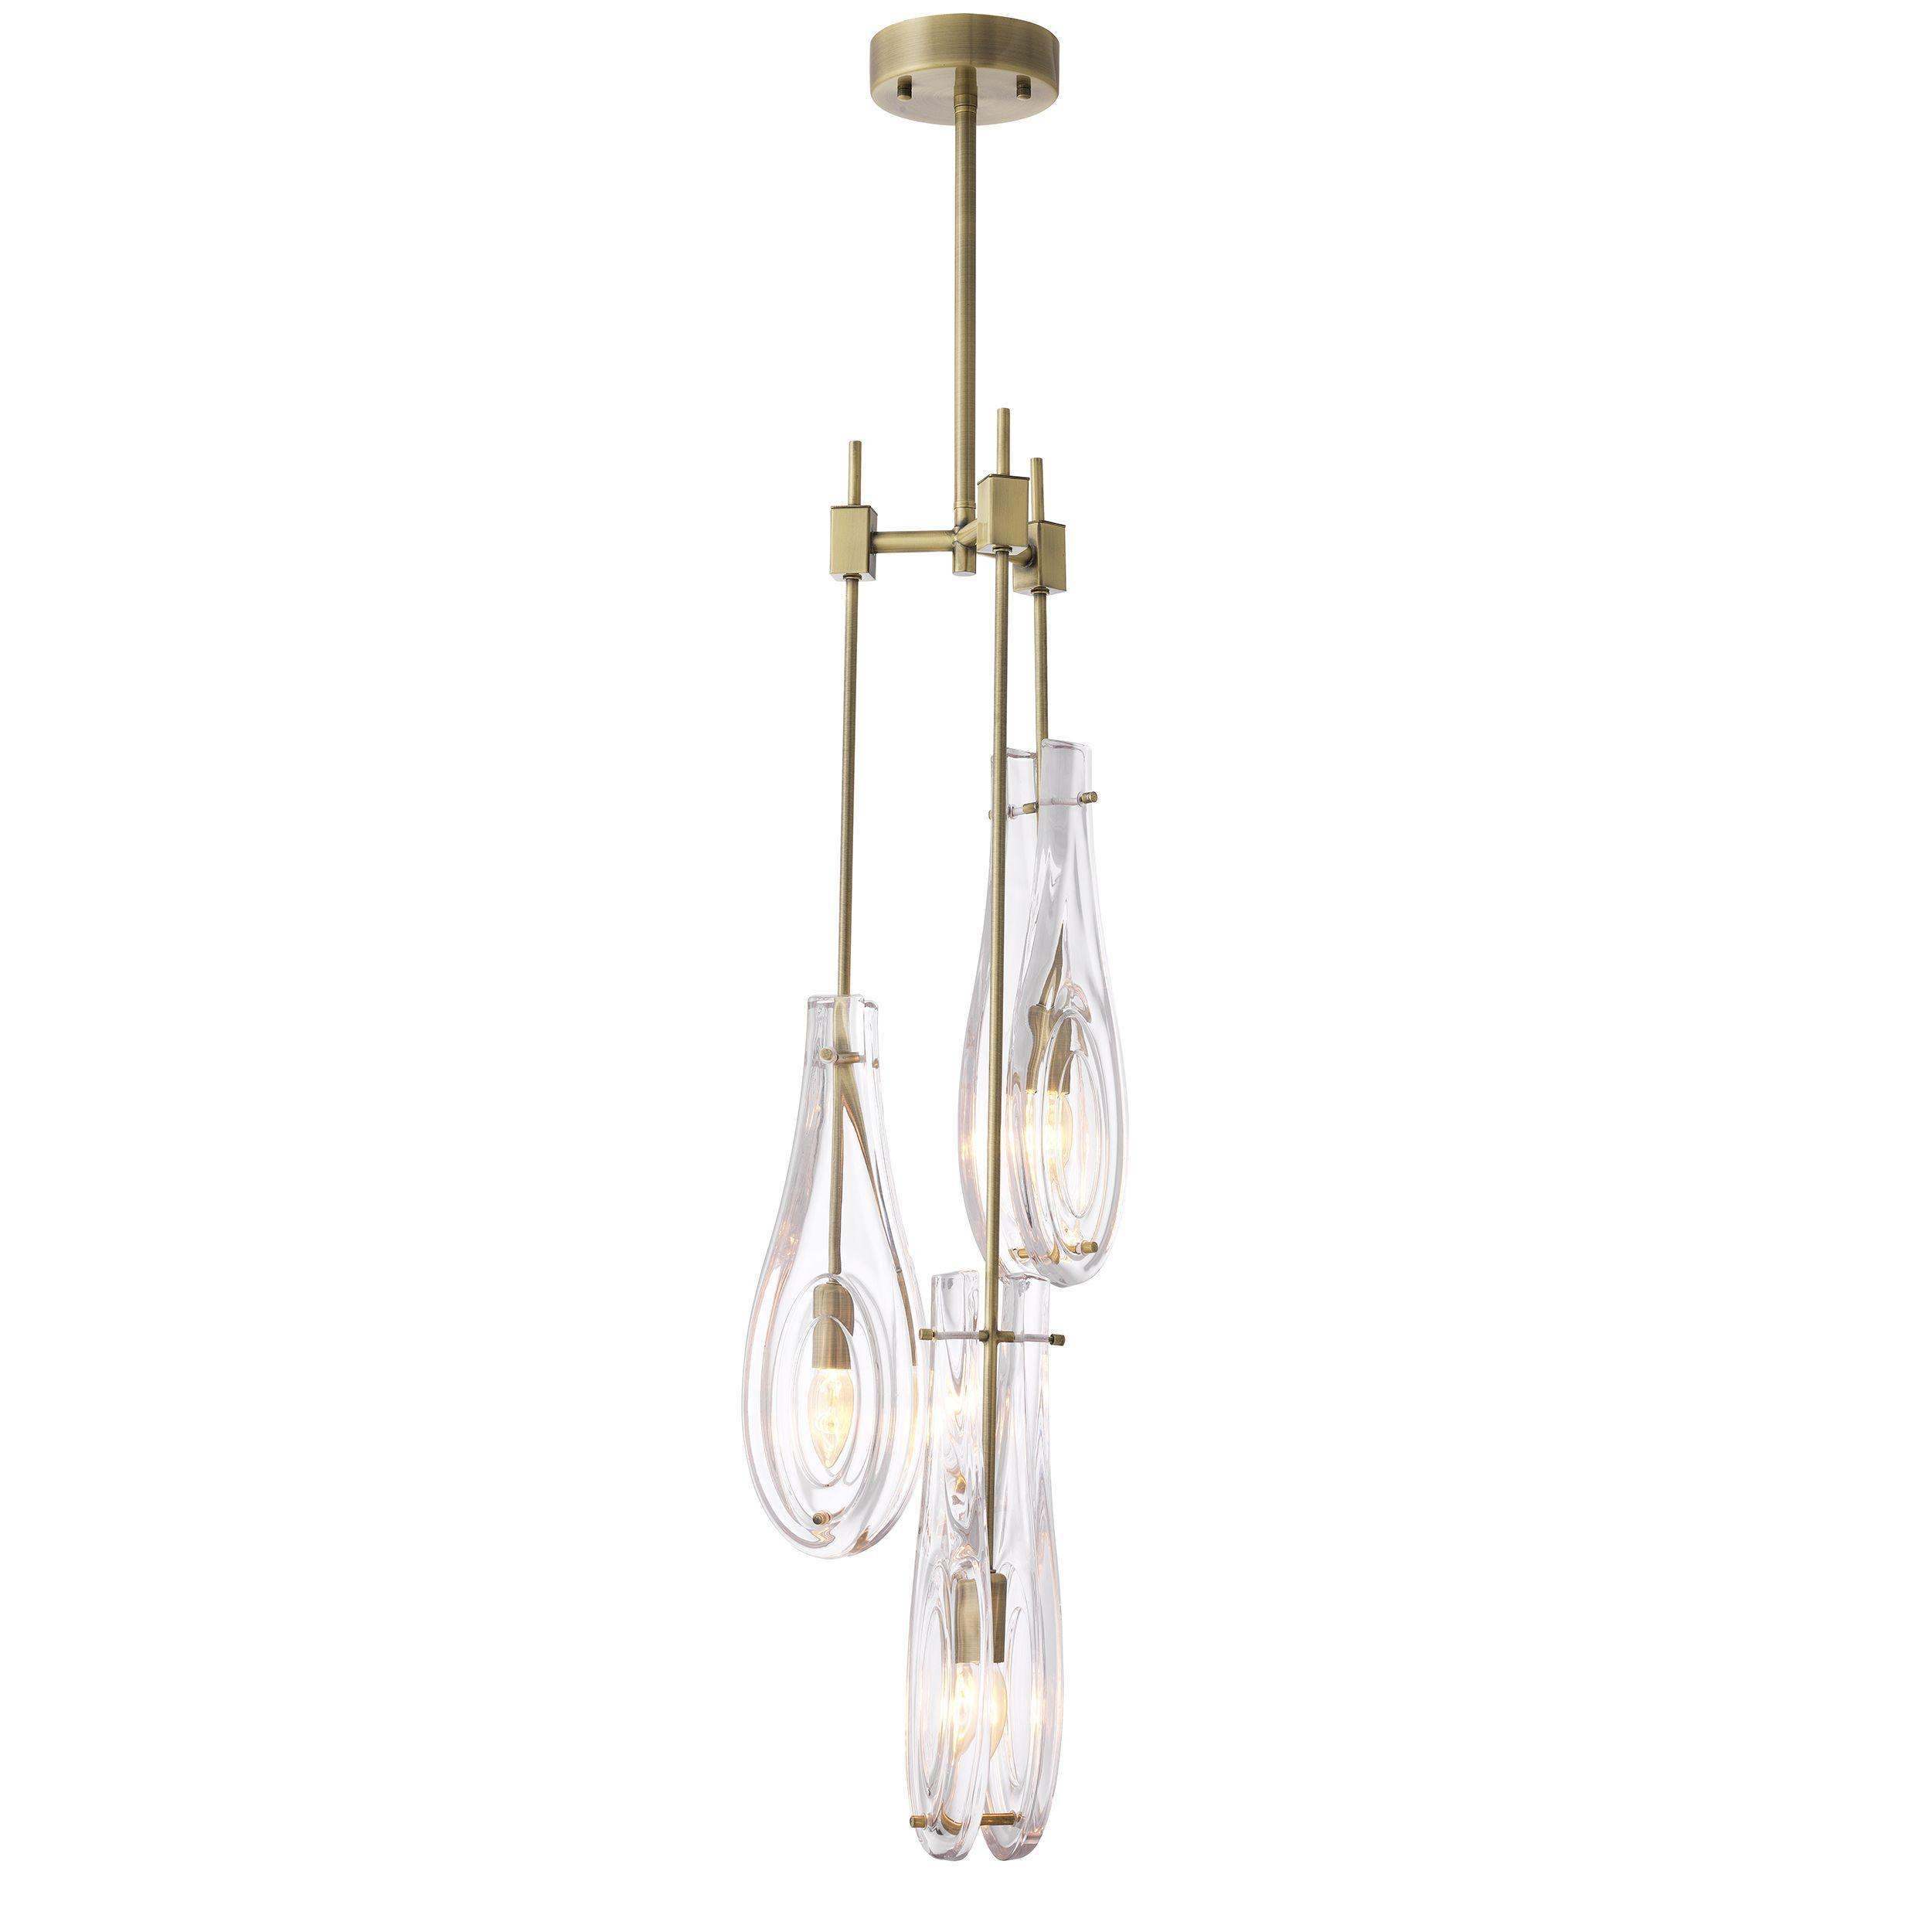 light brushed brass finish | clear glass S